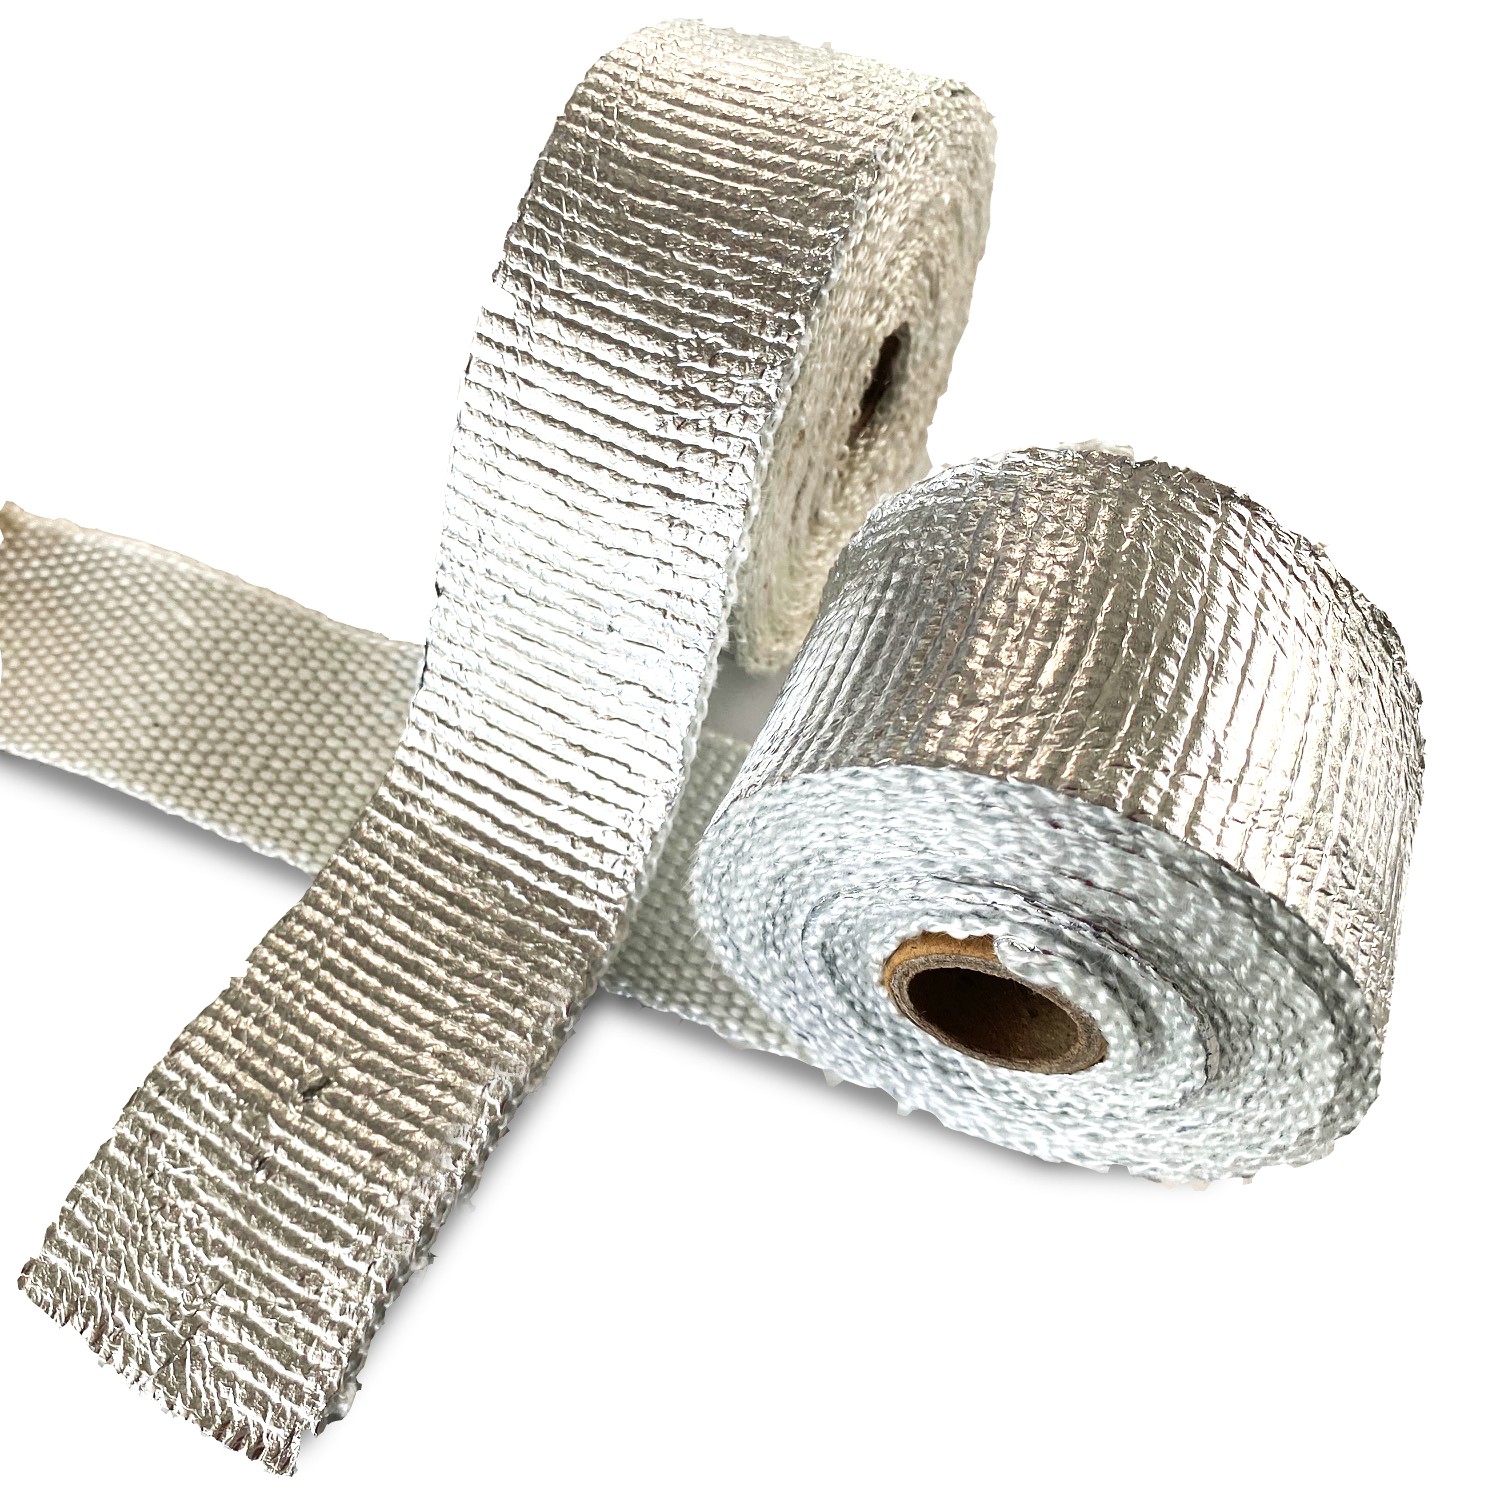 1 x 16 Silver Aluminum Foil Covered Exhaust Insulating Heat Wrap Roll Oil Resistance Waterproof for Motorcycle Fiberglass Heat Shield Tape with Stainless Ties From Manufacturer 